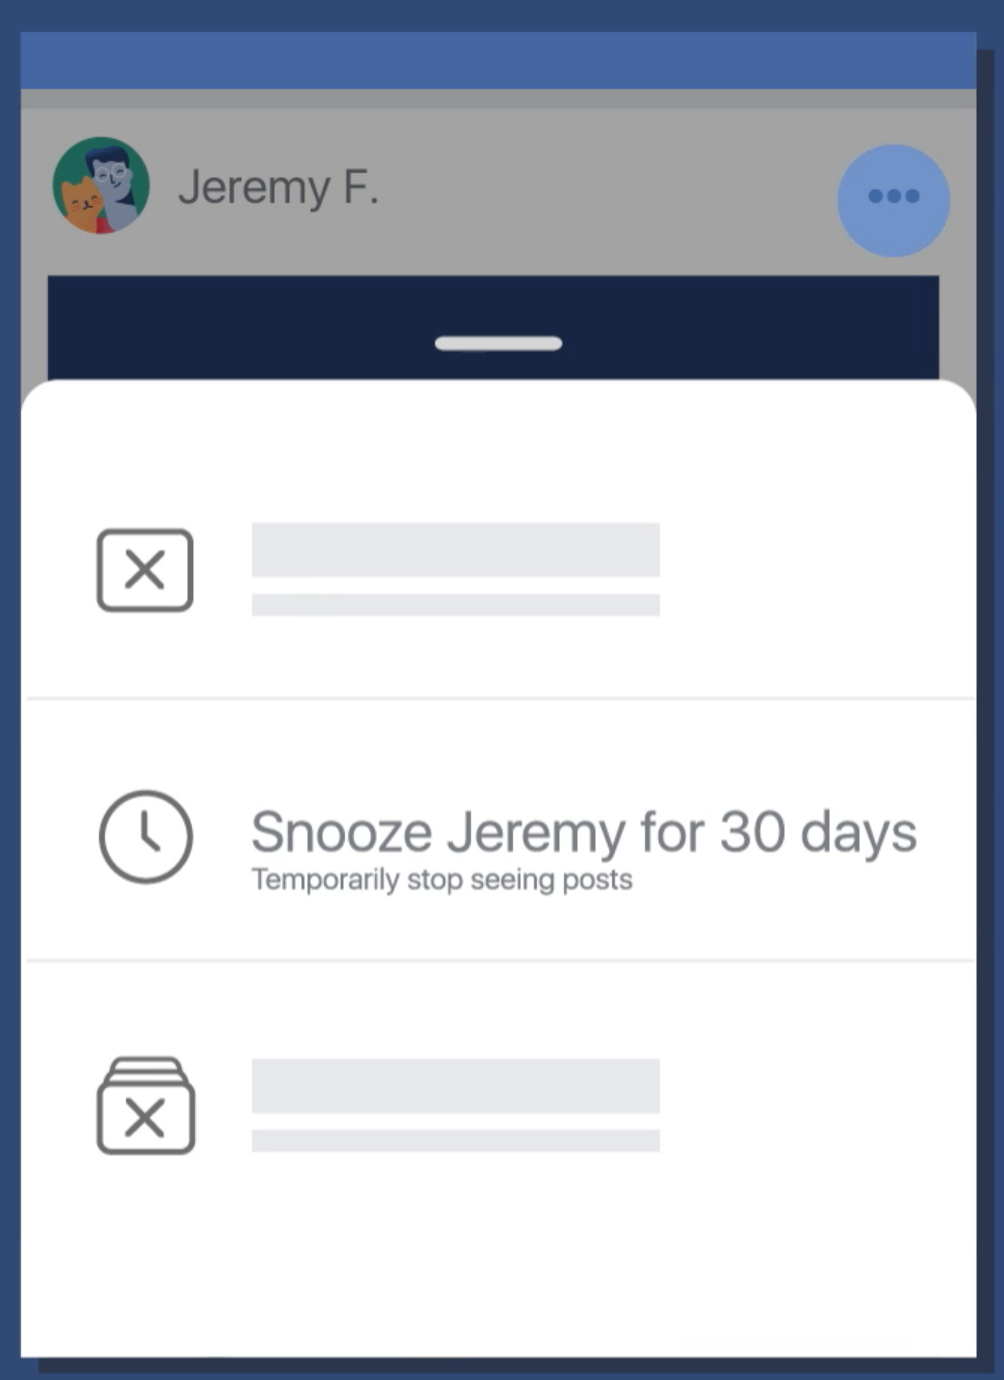 Facebook adds a Snooze button for muting people, groups and Pages for 30 days